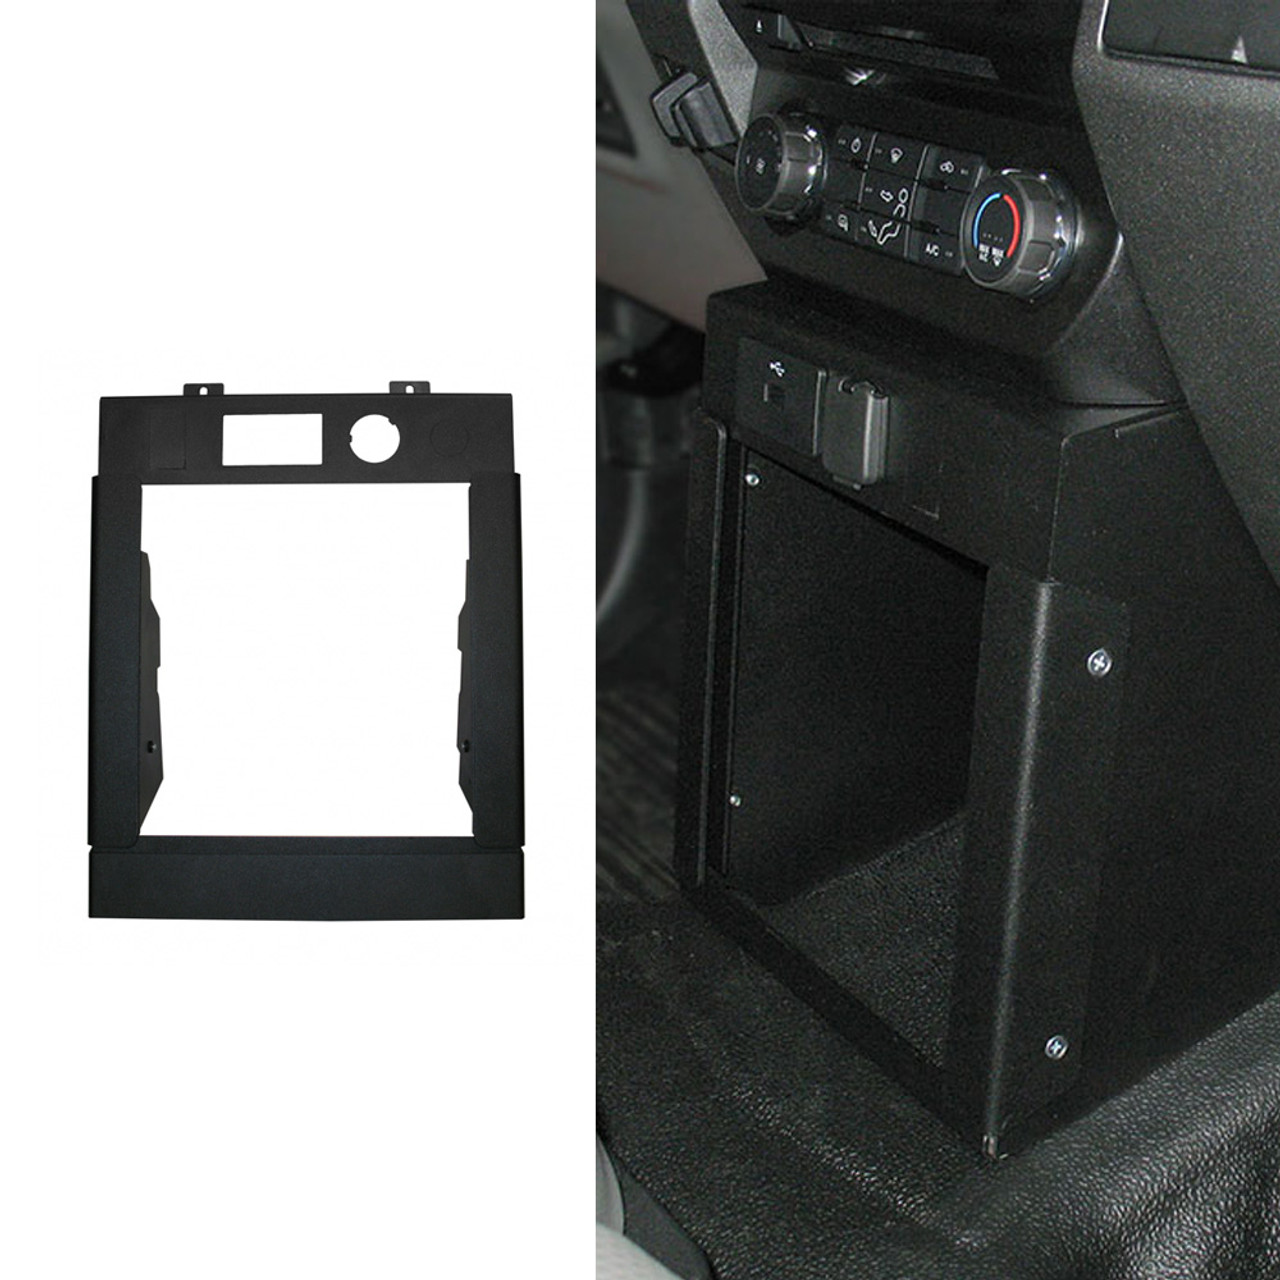 Gamber Johnson 7160-0875 Ford F-150 (2015-2020) and F-250 Super Duty (2017+) Vertical Console Box, includes faceplates and filler panels